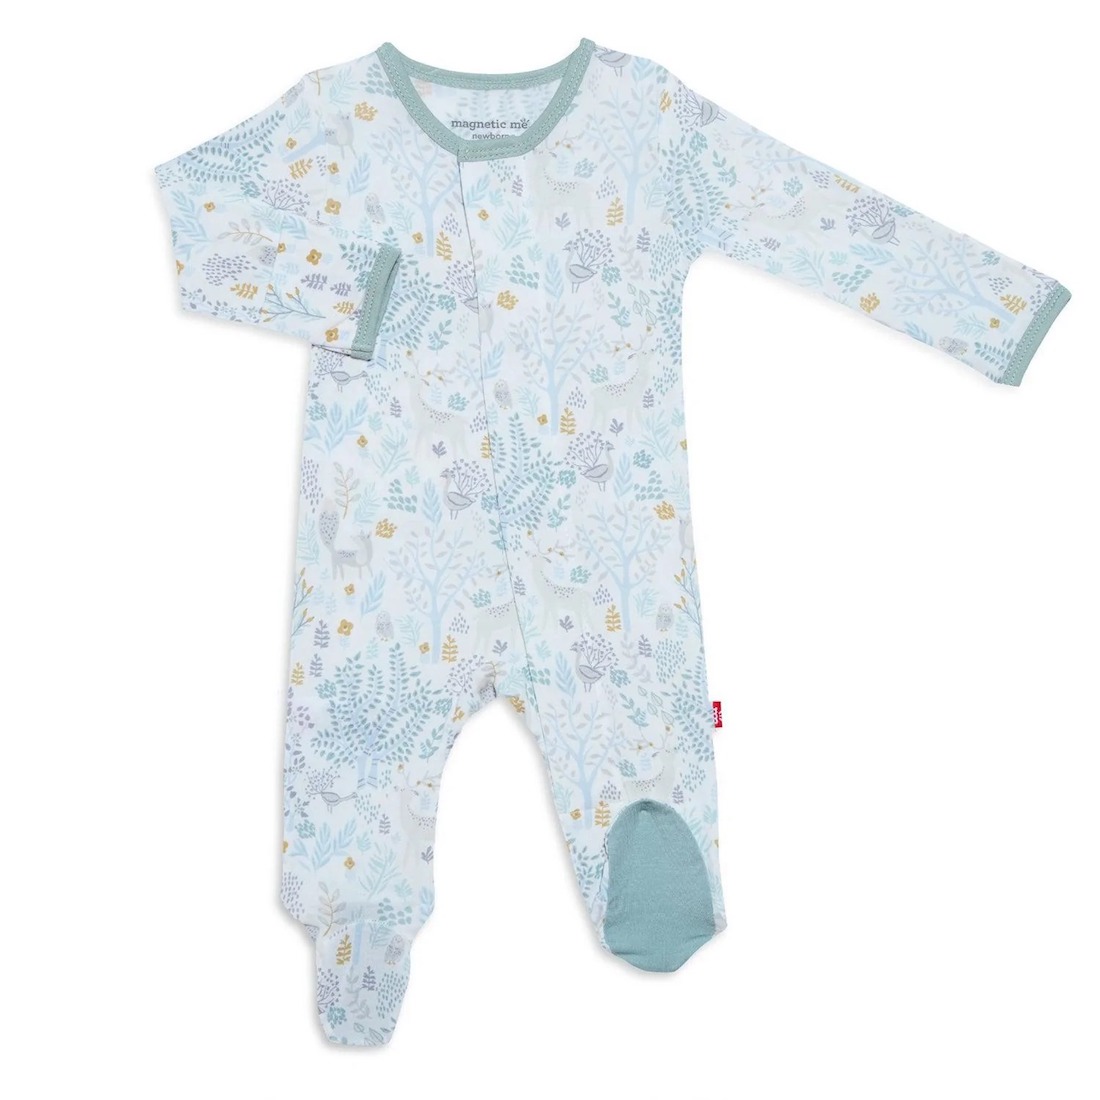 Magnetic Me imagine forest modal magnetic footie - 3-6 Months